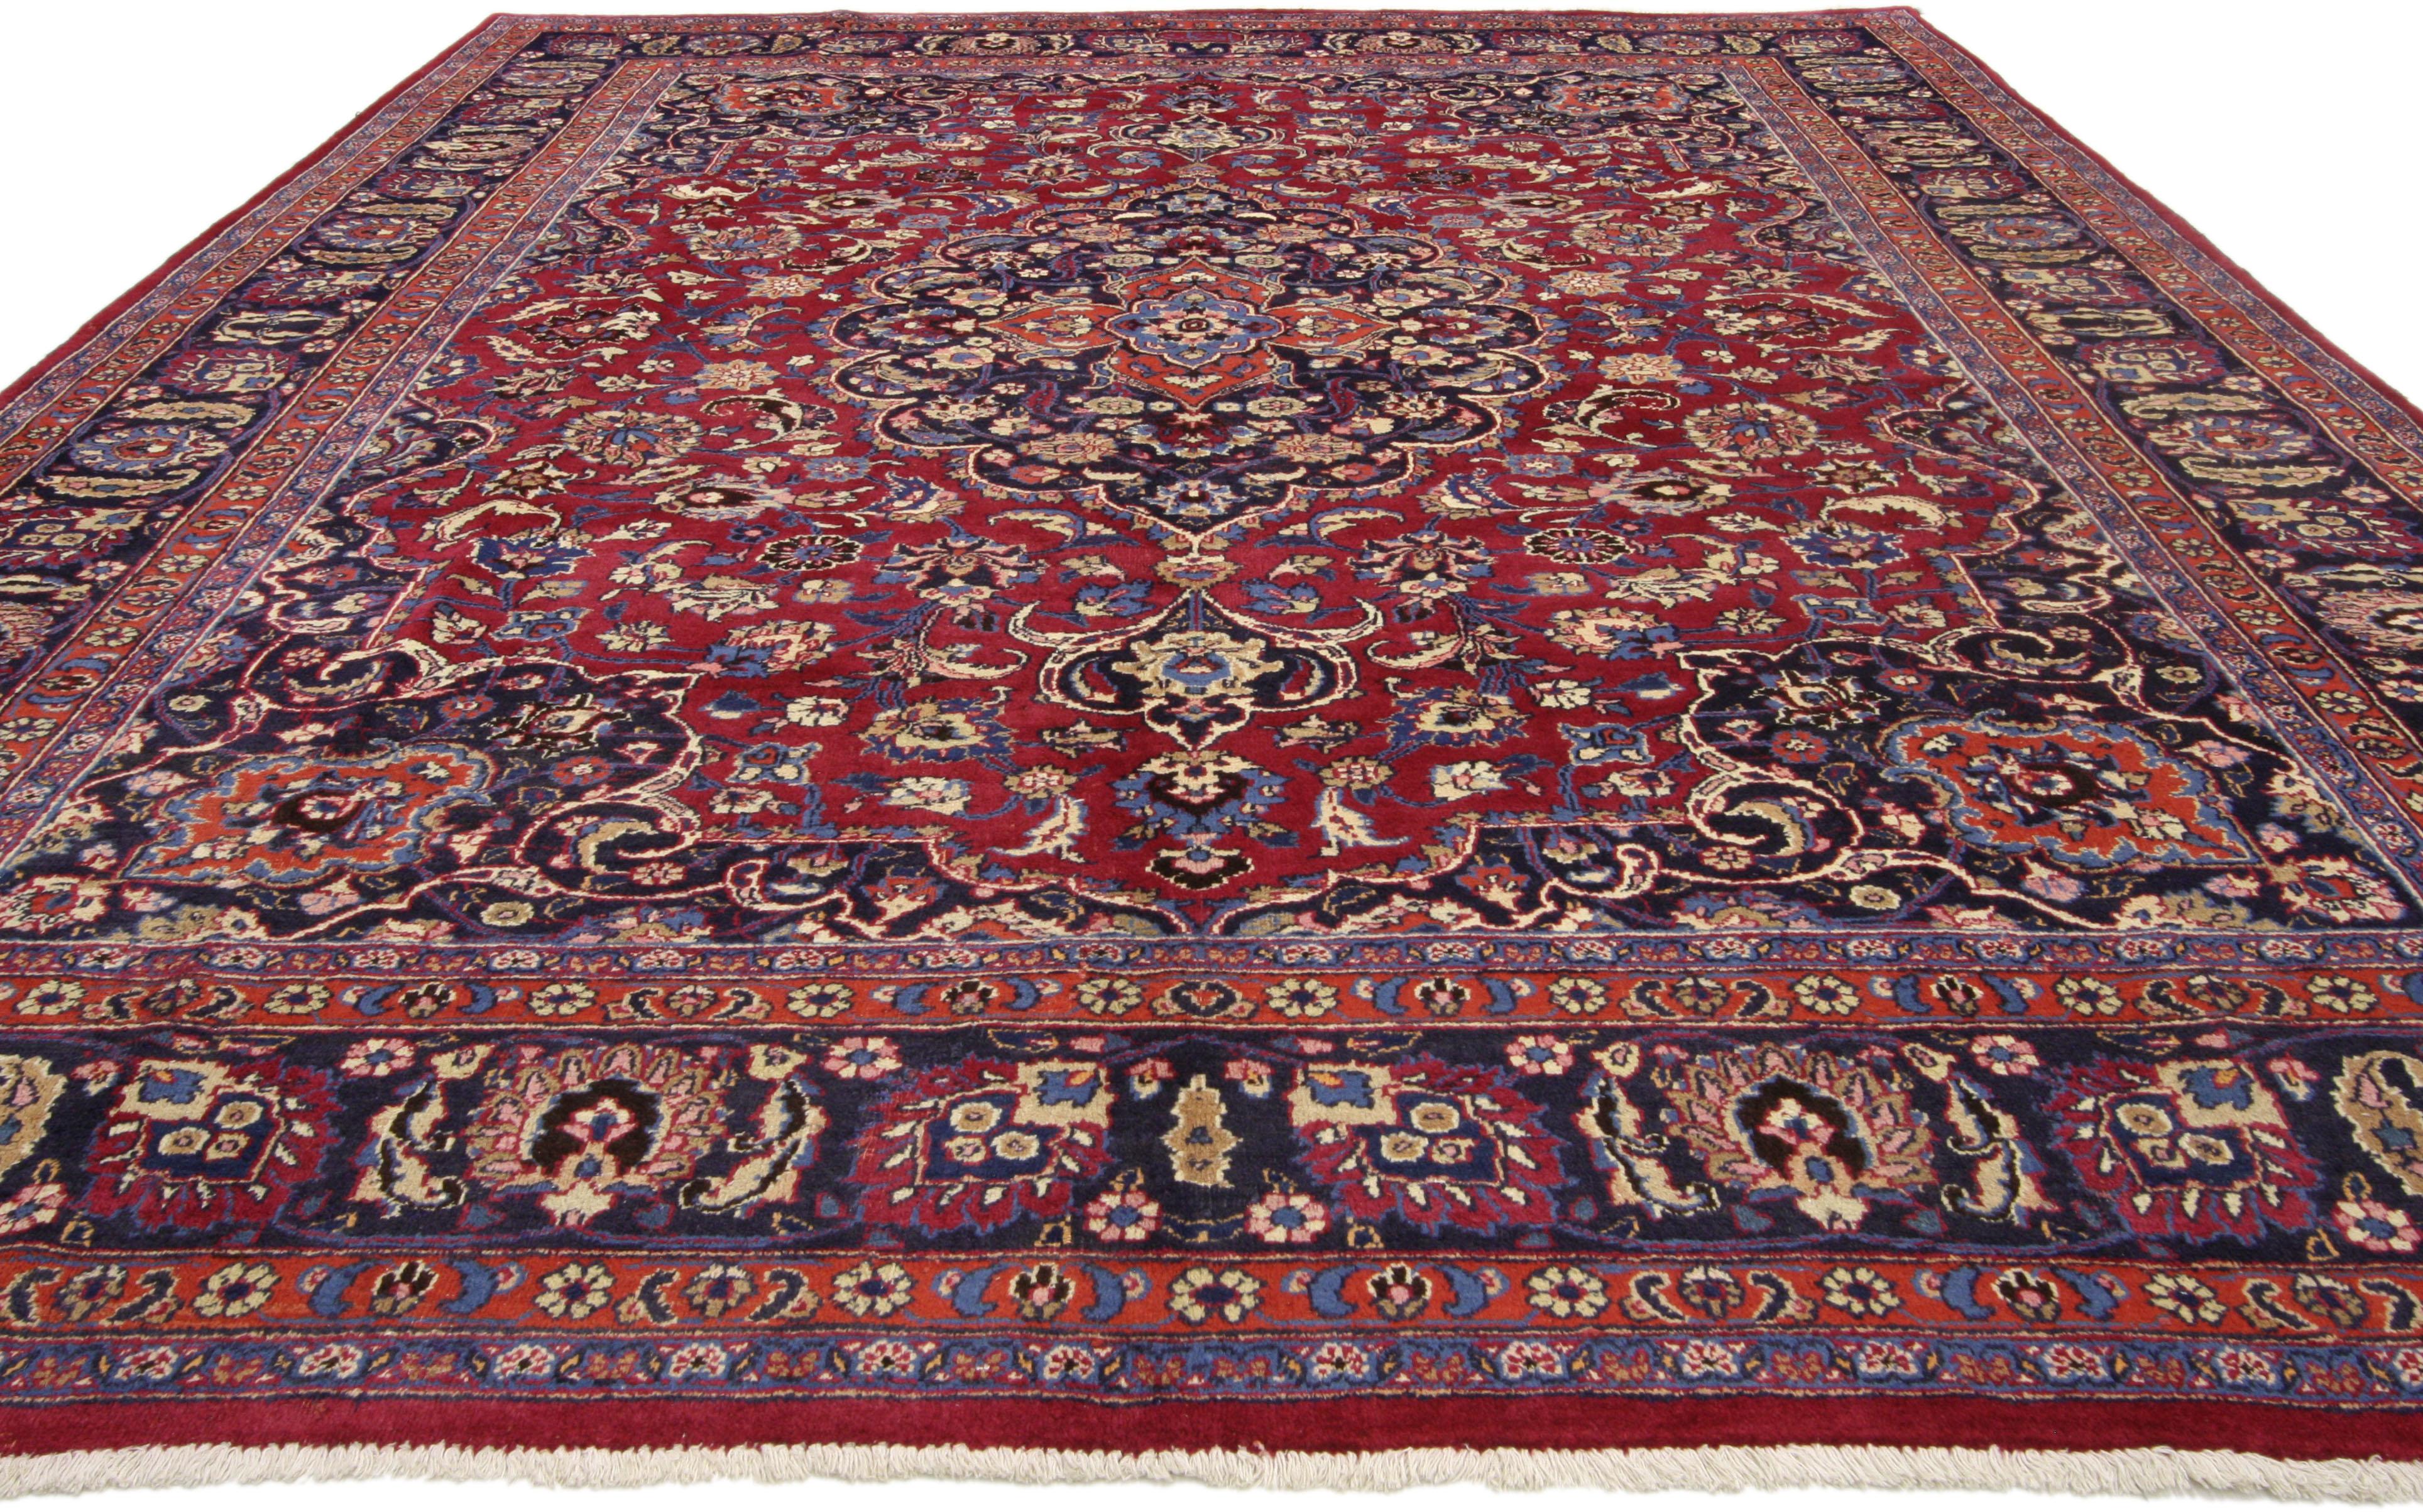 79669 Vintage Persian Mashhad Area Rug with Arabesque Baroque Regency Style. This hand-knotted wool vintage Persian Mashhad rug features a 16-point Mashhad medallion in a field of palmettes, serrated leaves and blooming flowers. The ink blue central